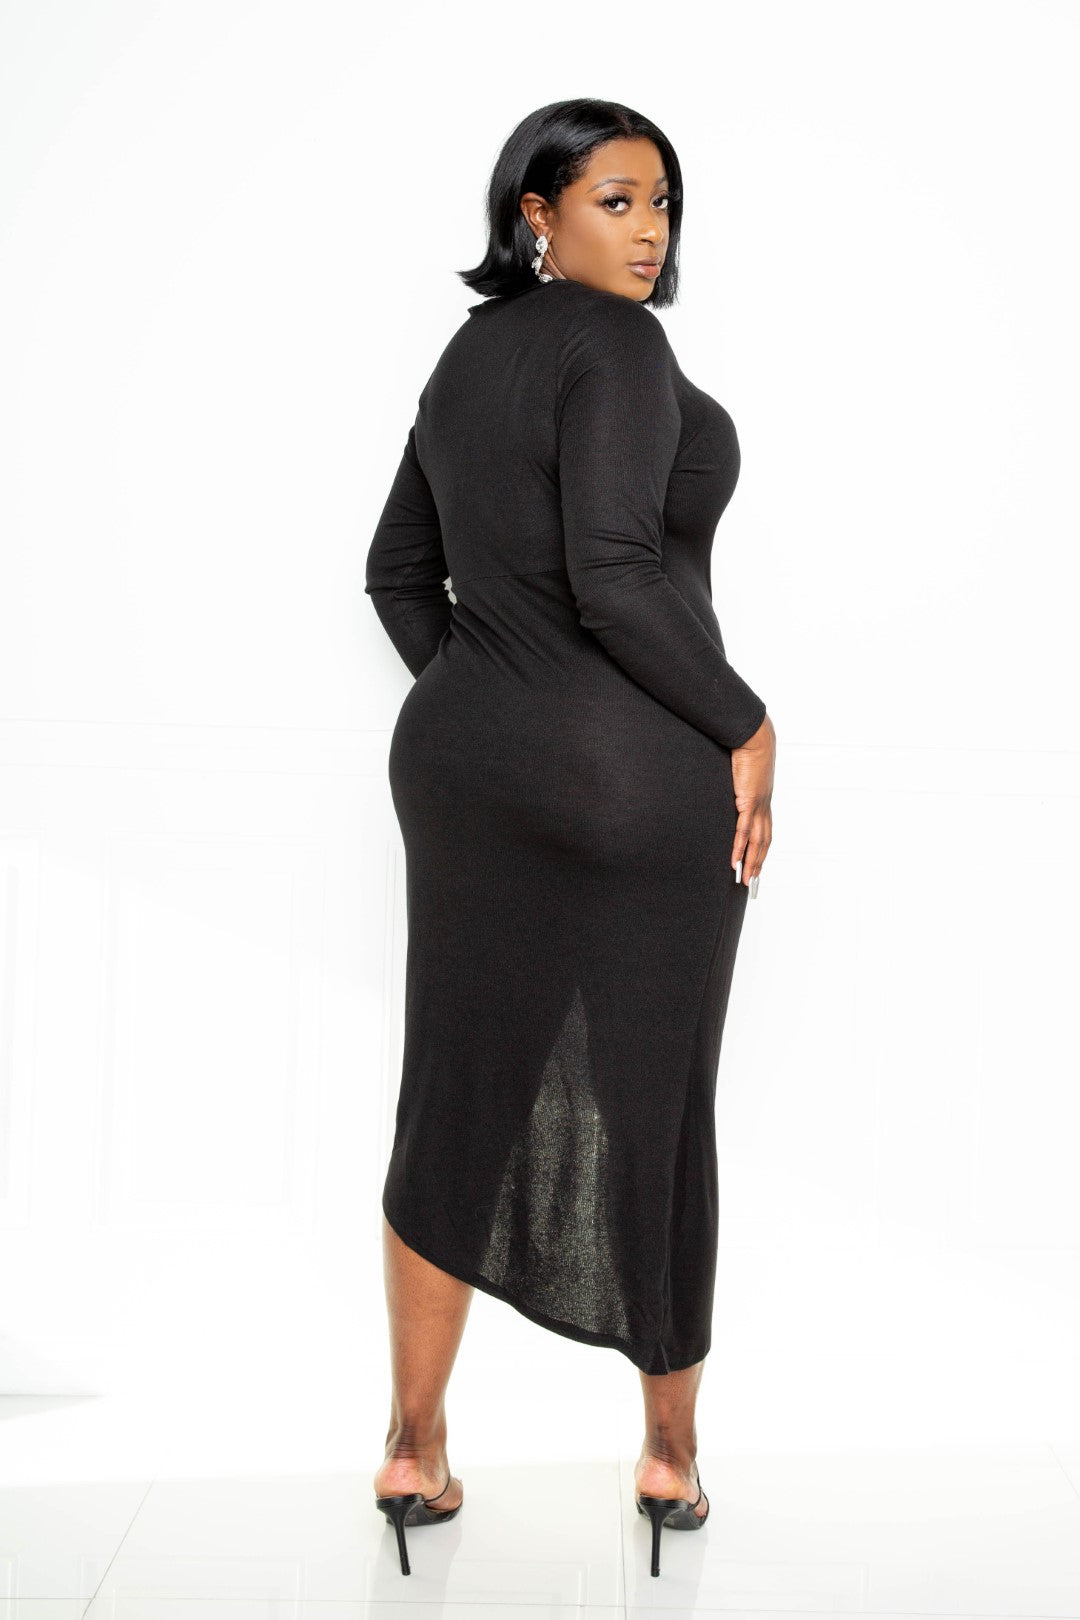 Plus Size Asymmetrical Sweater Dress With Waterfall Ruffle CCPRODUCTS, NEW ARRIVALS, PLUS SIZE, PLUS SIZE DRESSES Style Your Curves